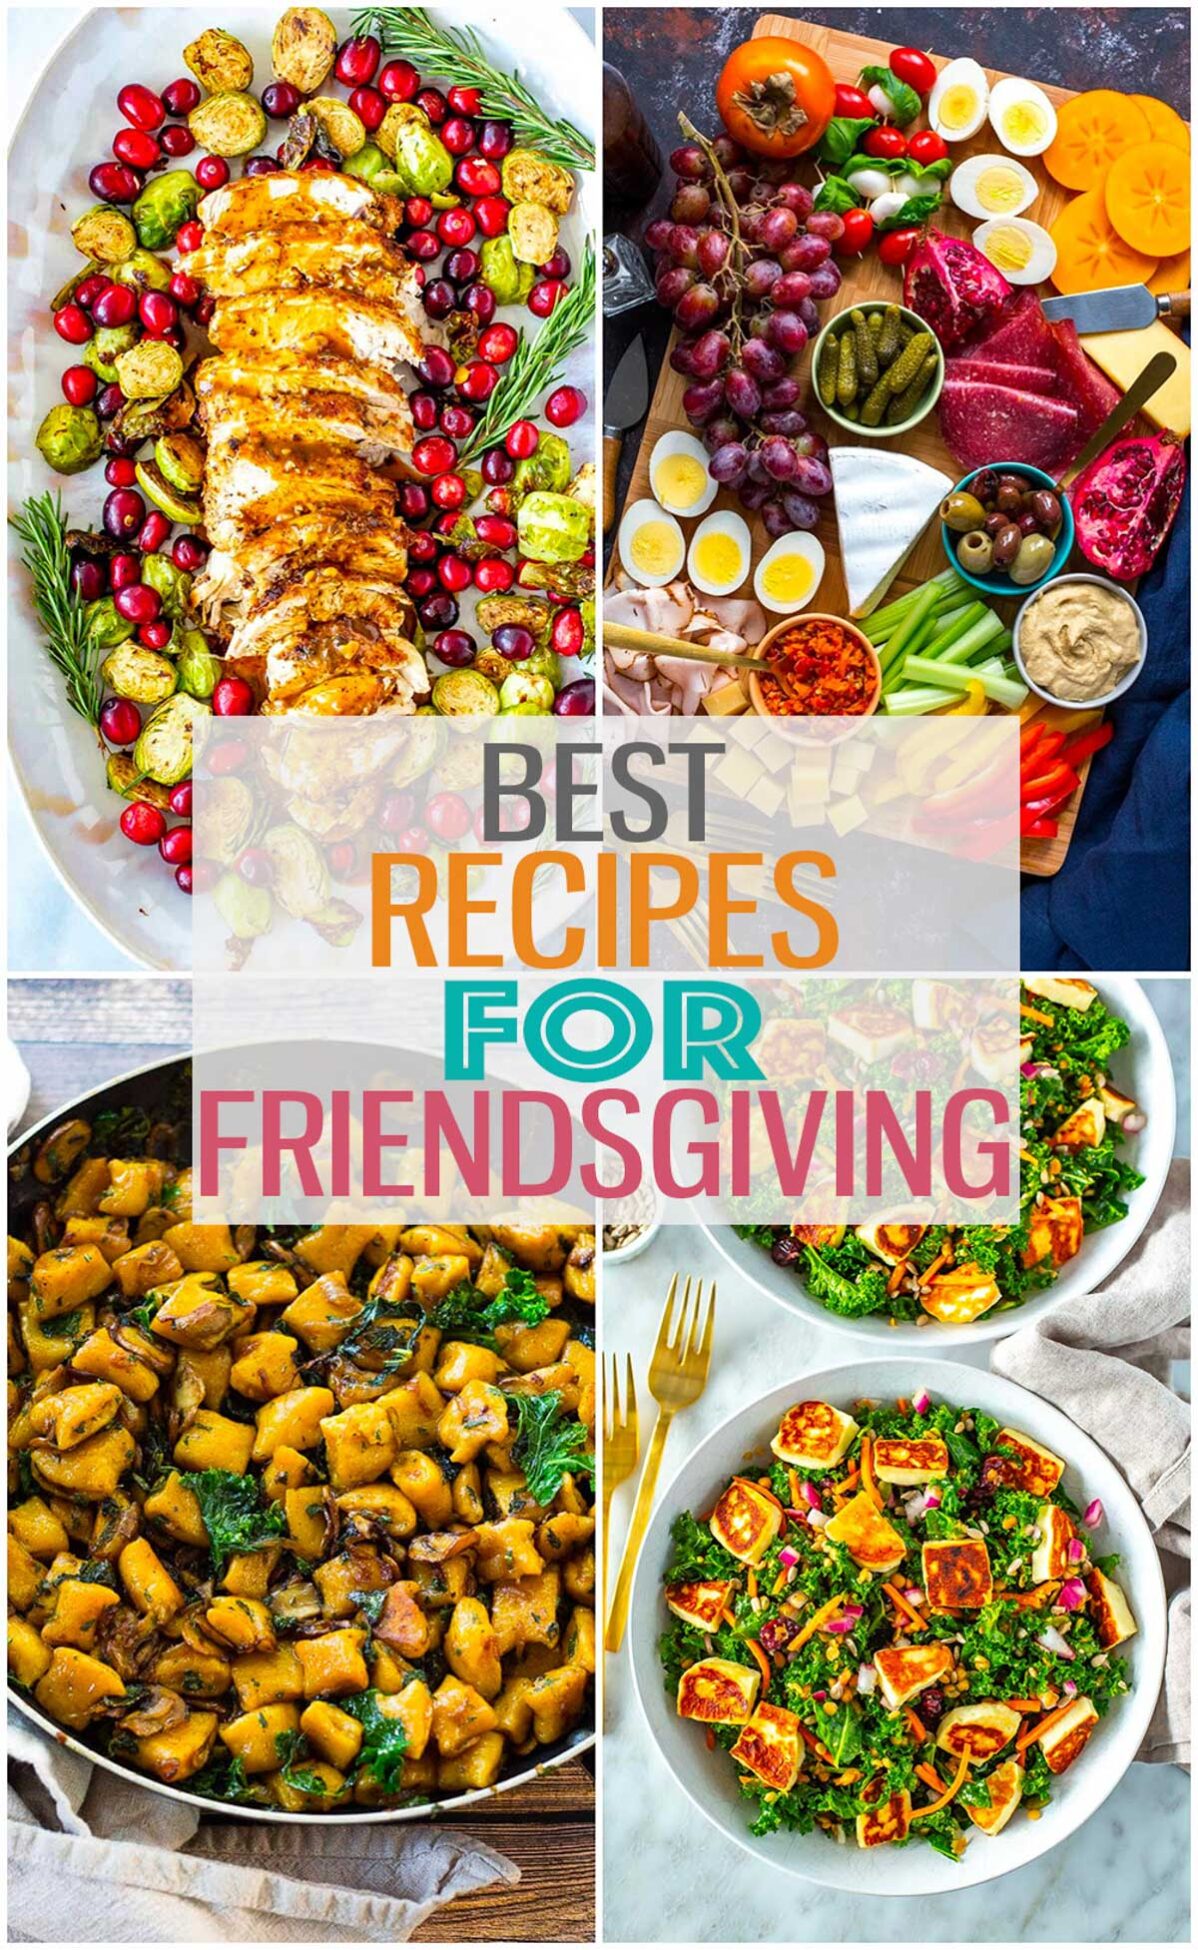 Four different Friendsgiving recipes with the text "Best Recipes for Friendsgiving" layered over top.